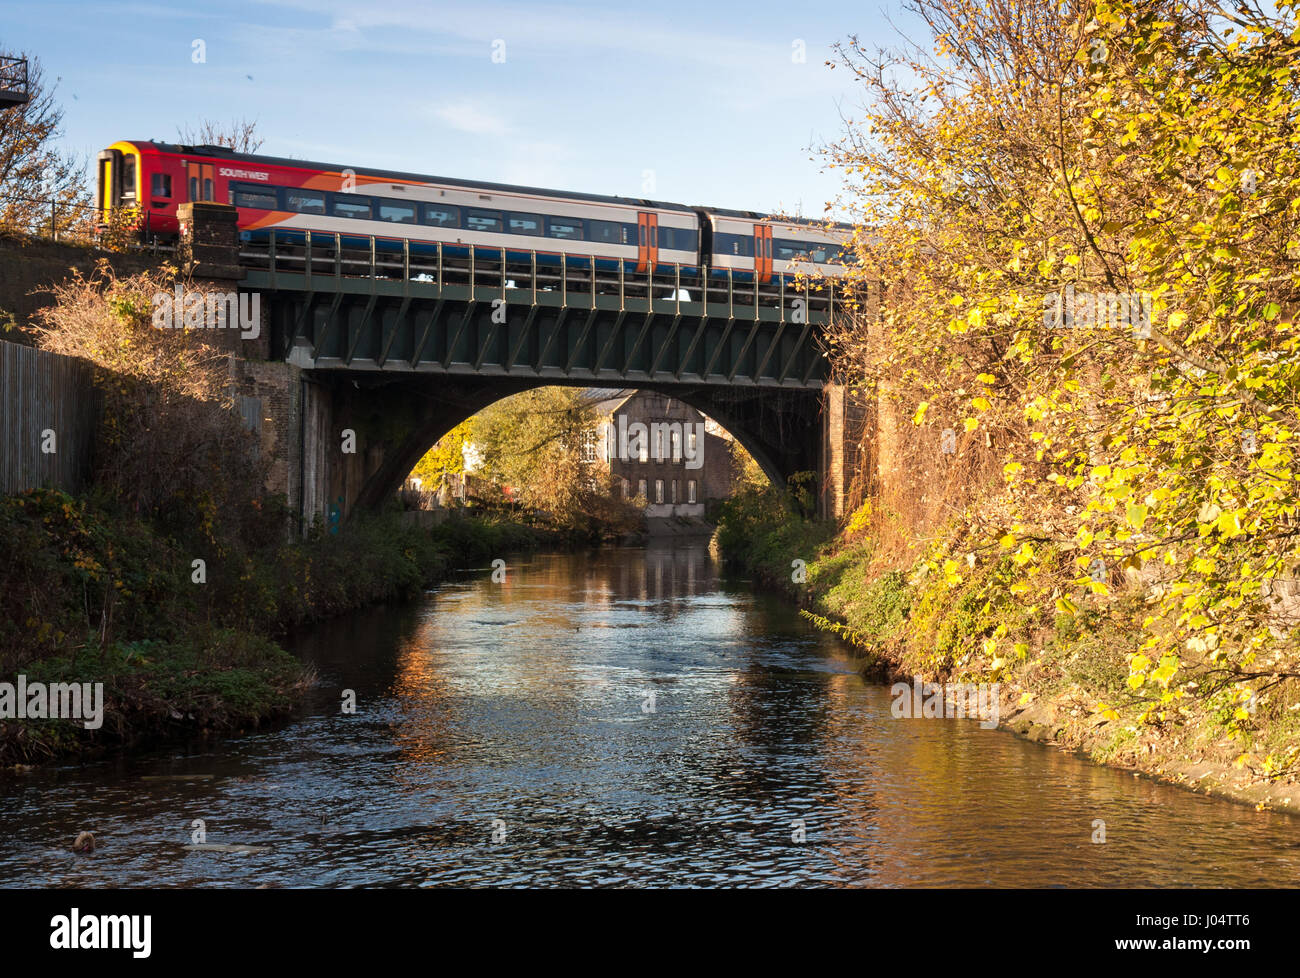 London, England, UK - November 18, 2012: South West Trains Class 159 diesel passenger trains cross the River Wandle at Earlsfield in Wandsworth. Stock Photo